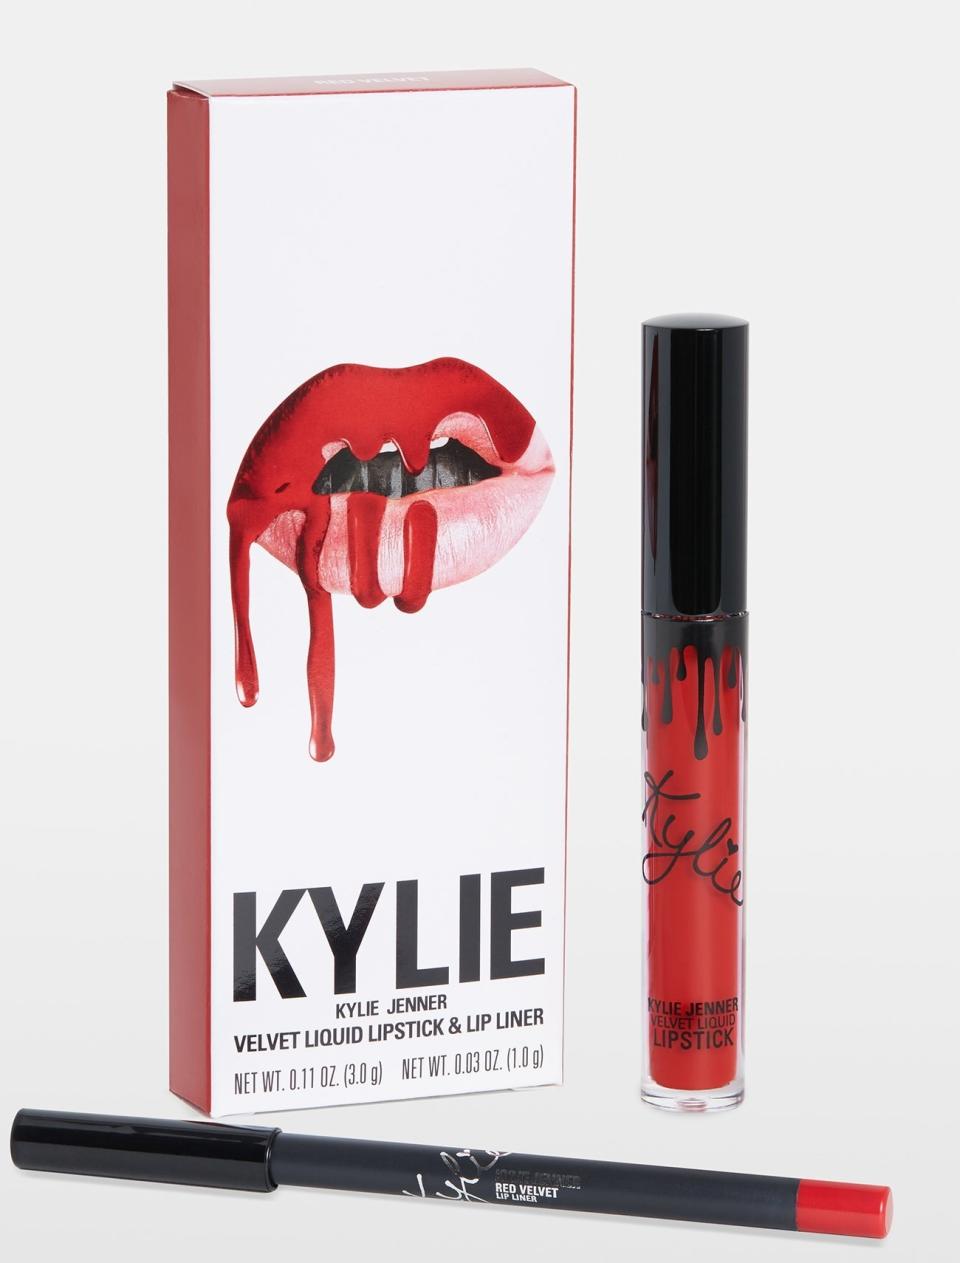 Shop Now: Kylie Cosmetics Lip Kit in Red Velvet, $27, available at Kylie Cosmetics.